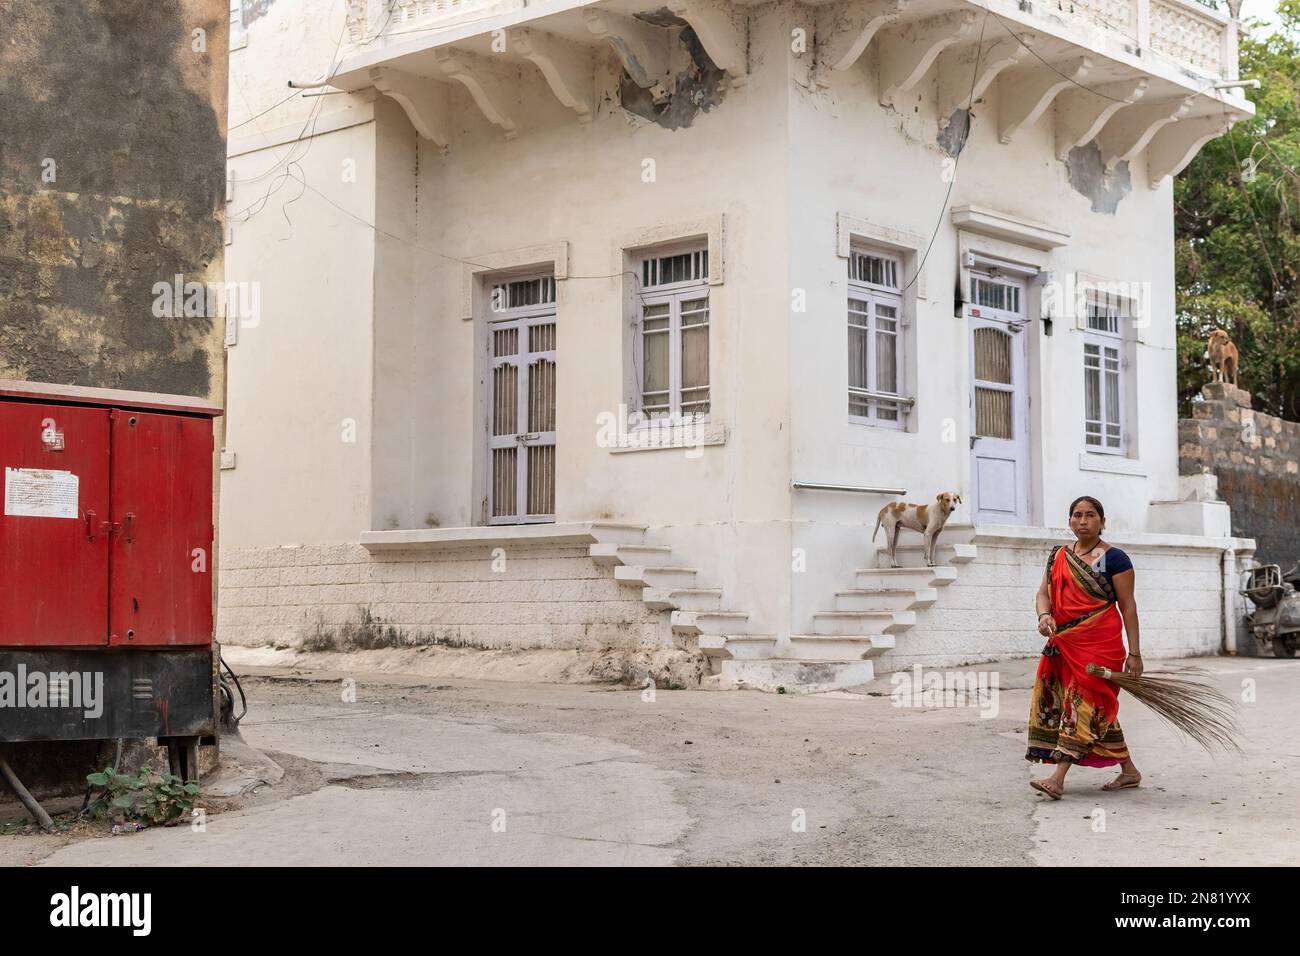 Diu, India - December 2018: An Indian women wearing a red sari walking with a broom stick past an old Portuguese era house in the island town of Diu. Stock Photo